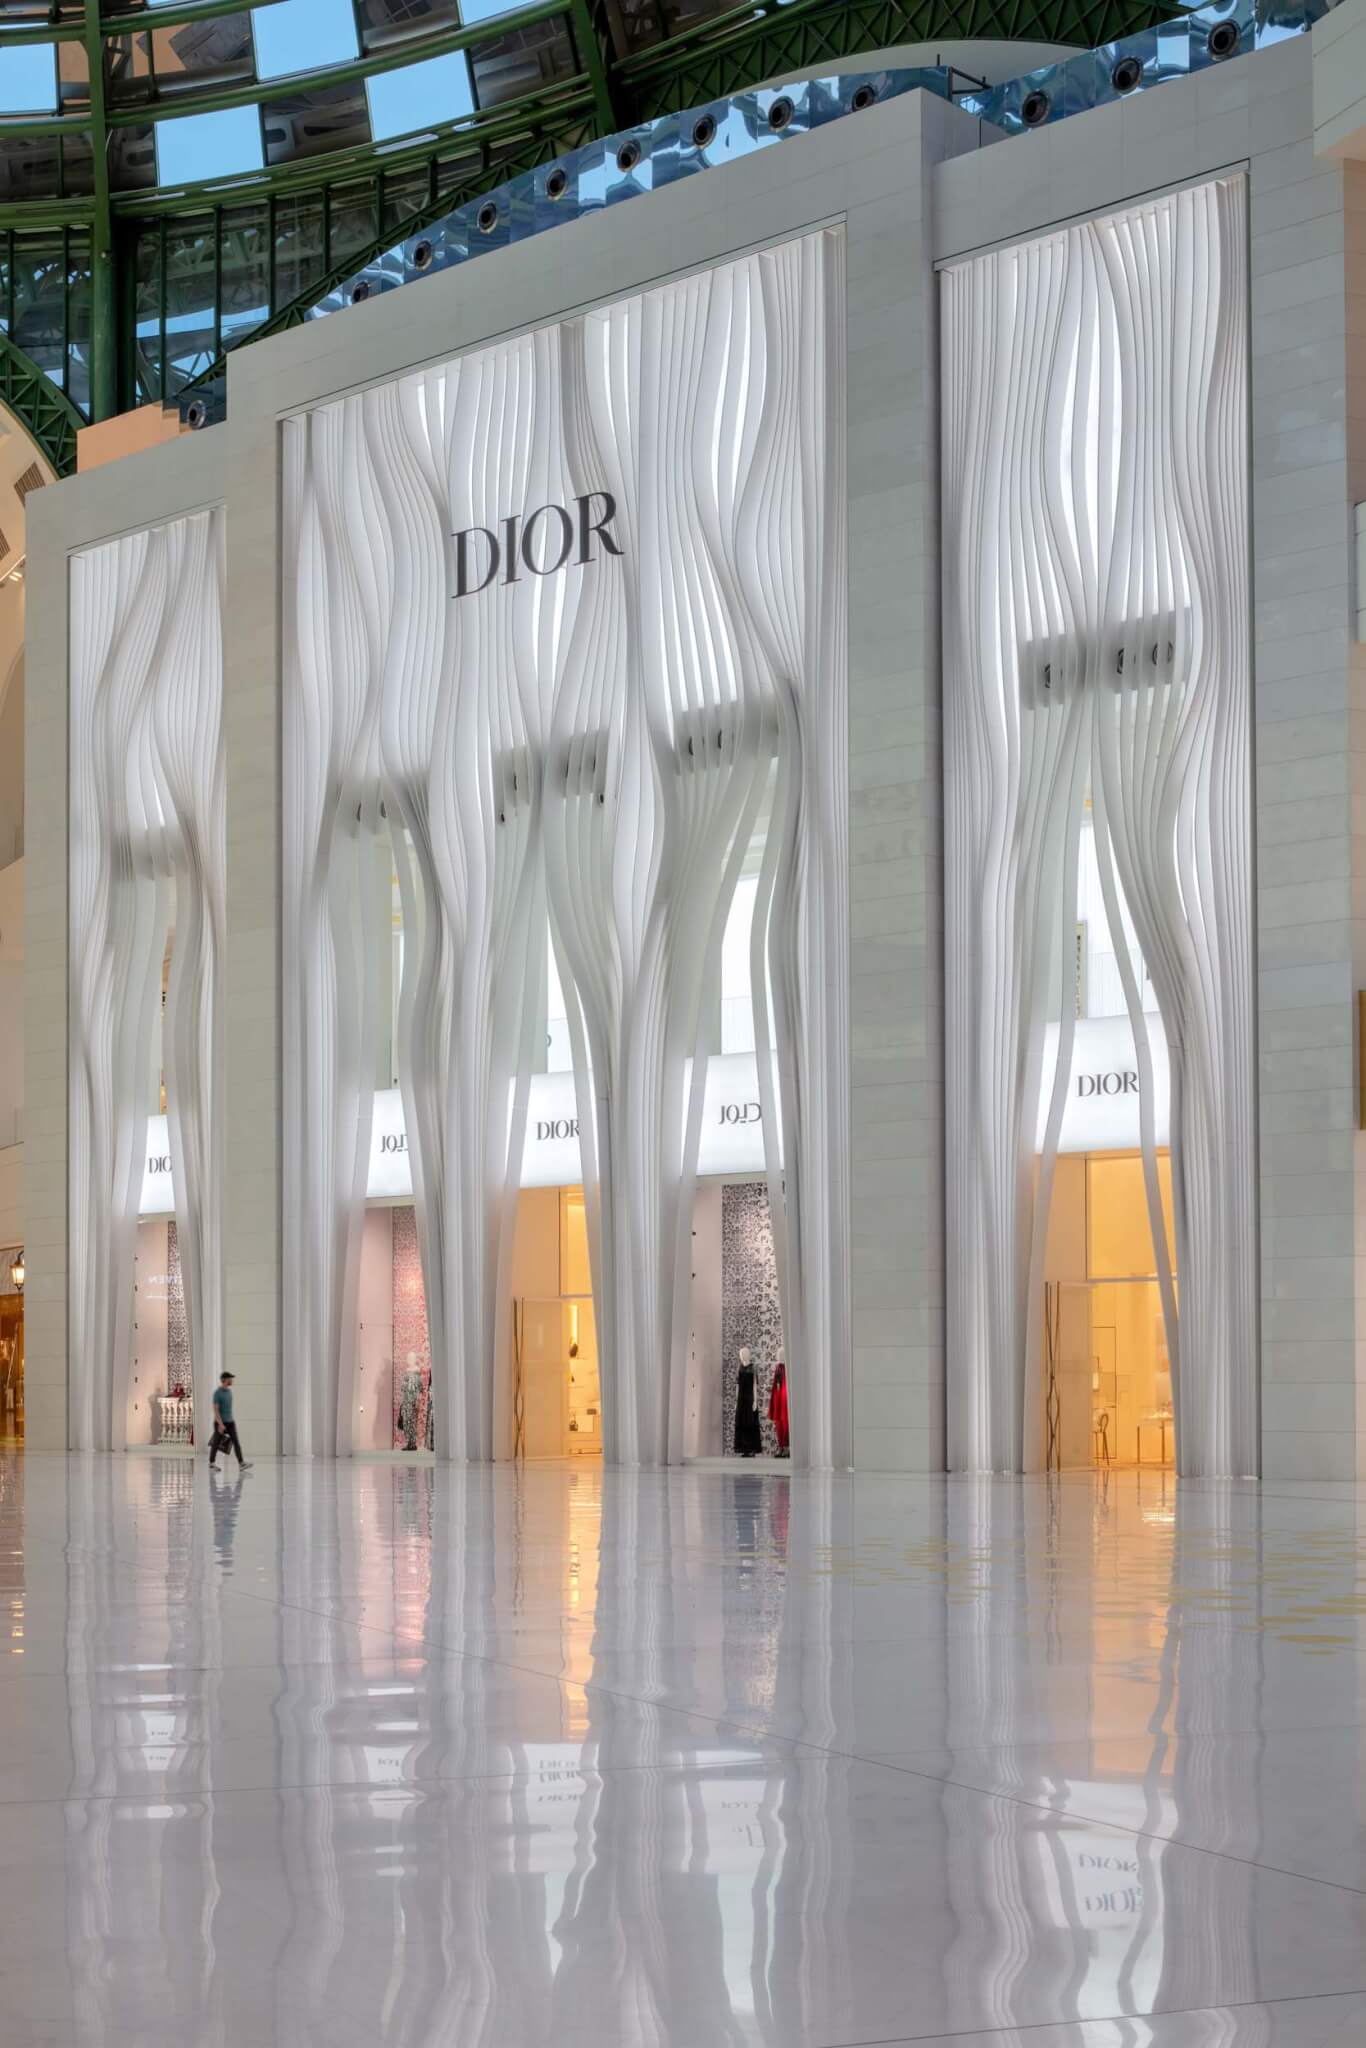 dior storefront in a mall